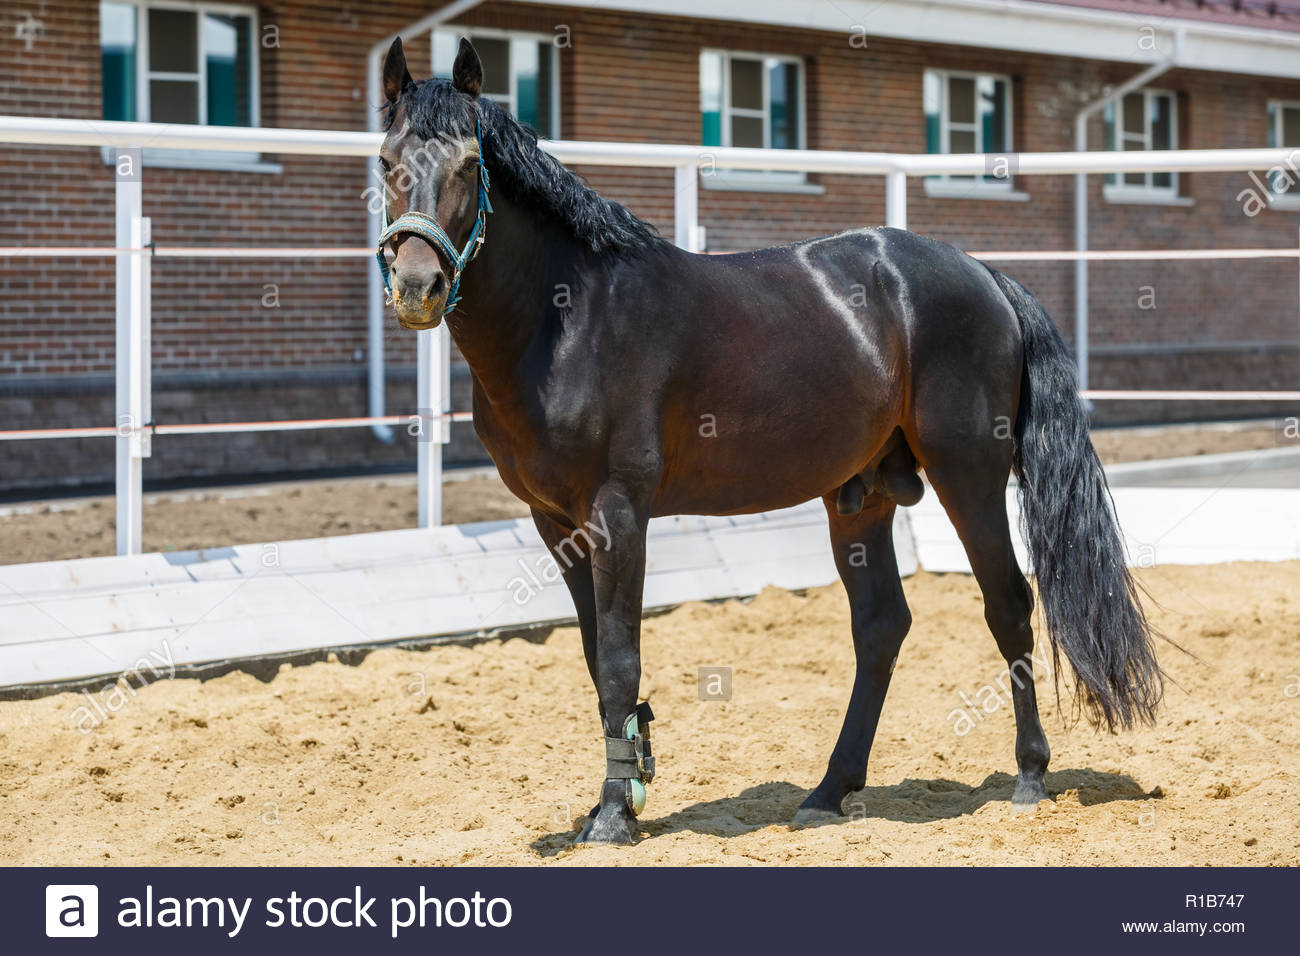 Black Horse Stands On Sand In A Separate Corral The Background